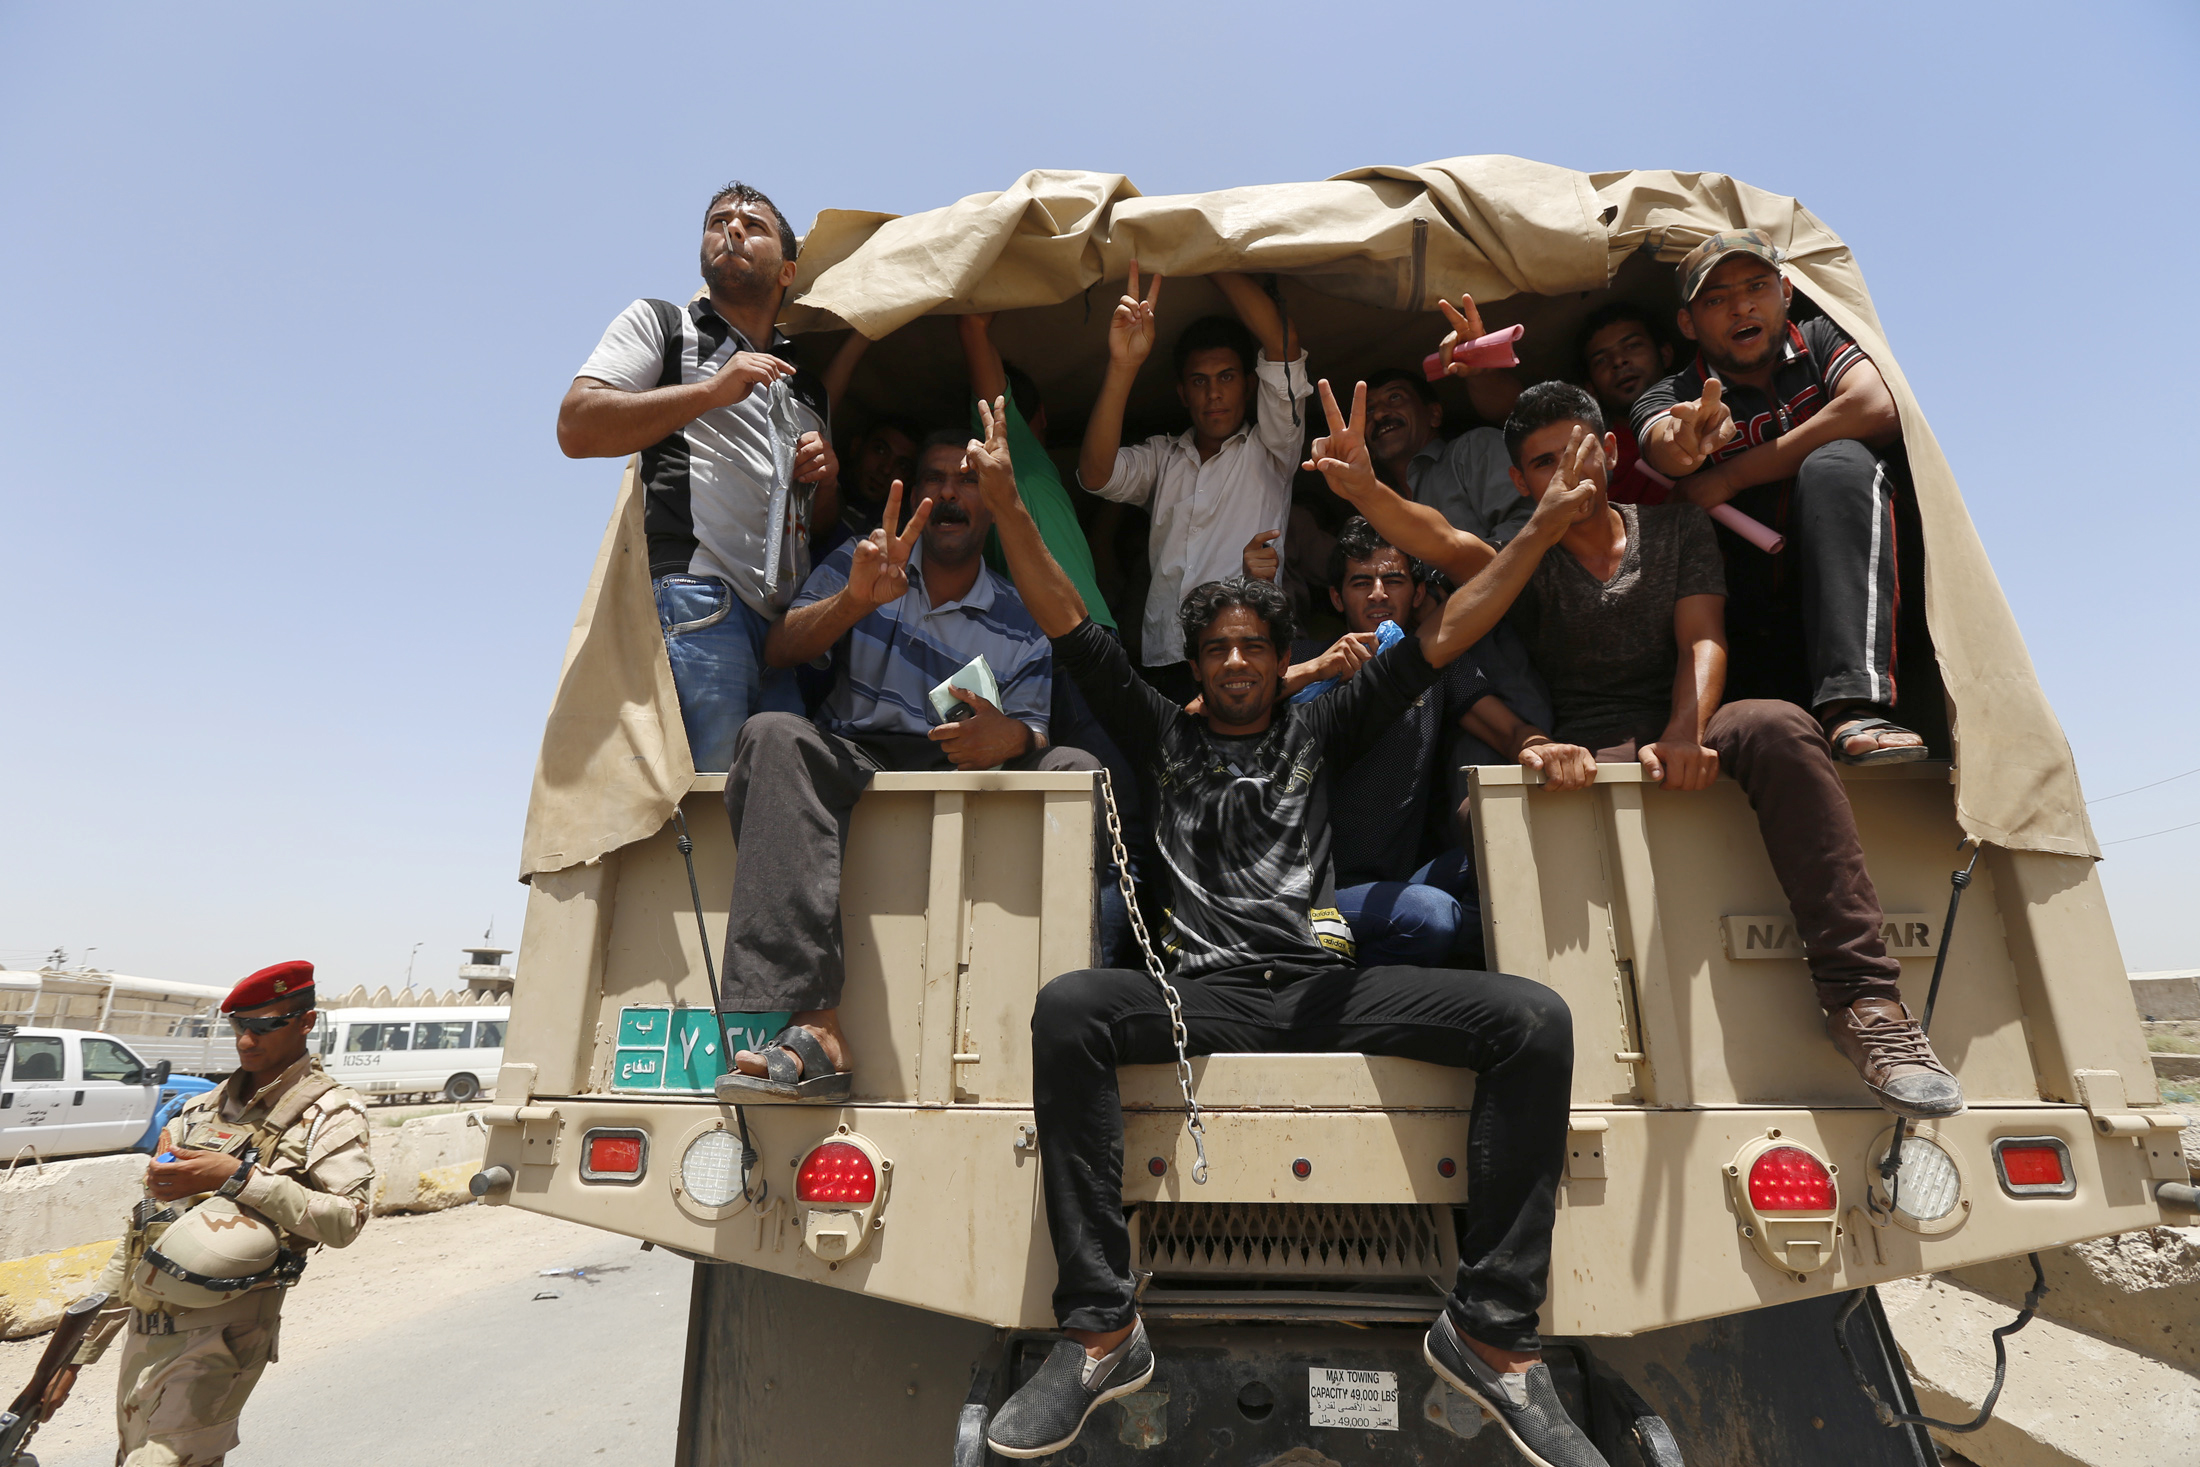 PHOTO: Volunteers, who have joined the Iraqi Army to fight against the predominantly Sunni militants who have taken over Mosul and other Northern provinces, travel in army trucks in Baghdad June 14, 2014.